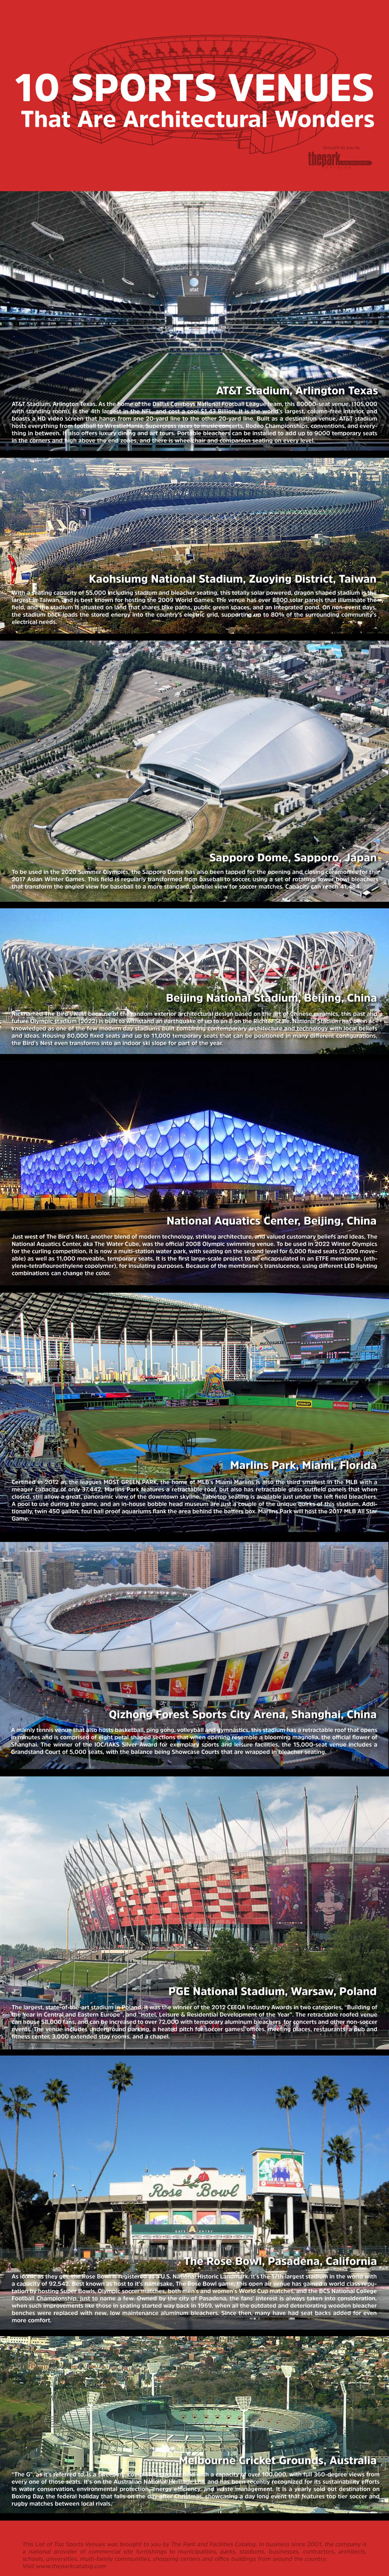 Top Ten Sports Stadiums and Venues in the World